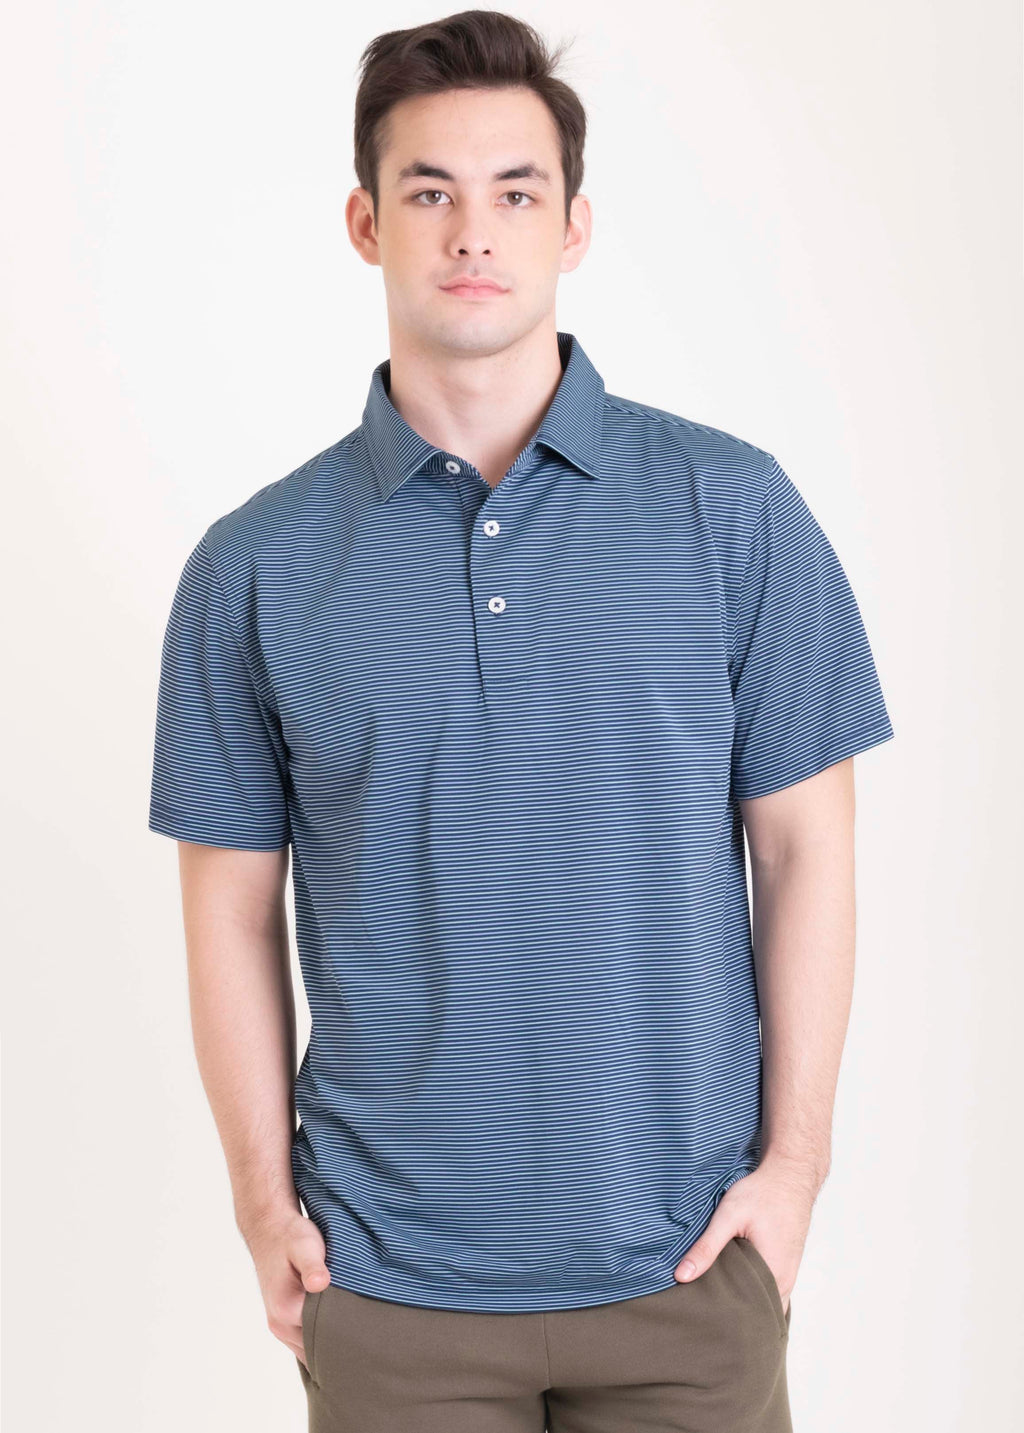 Ramé Dryfit Polo Shirt in Land and Sea